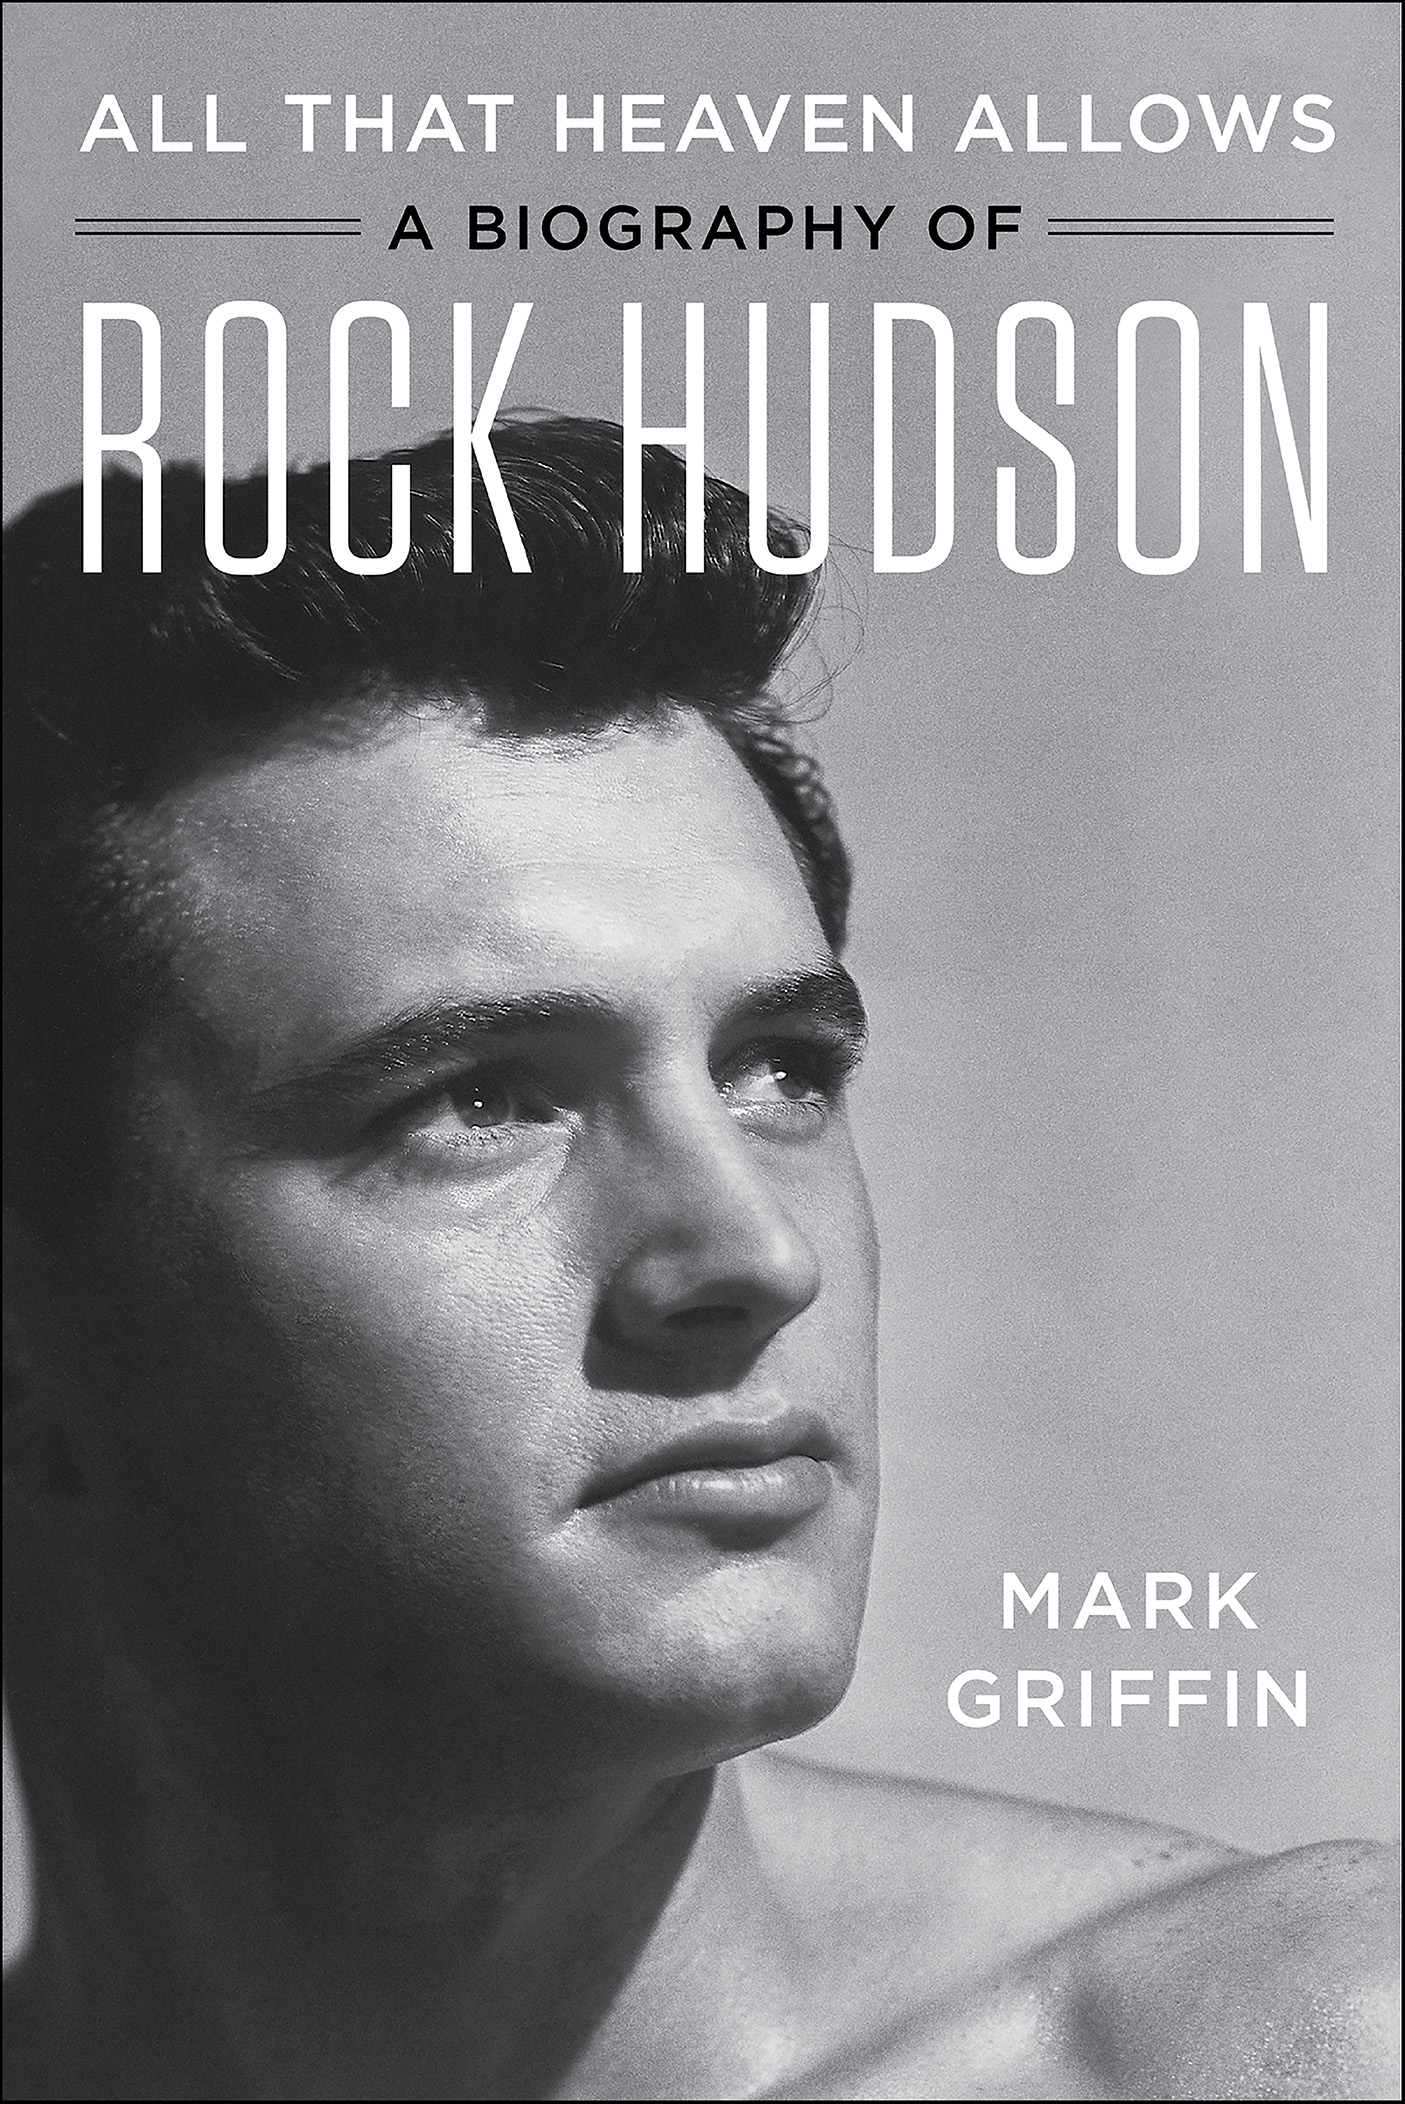 All that heaven allows a biography of Rock Hudson cover image